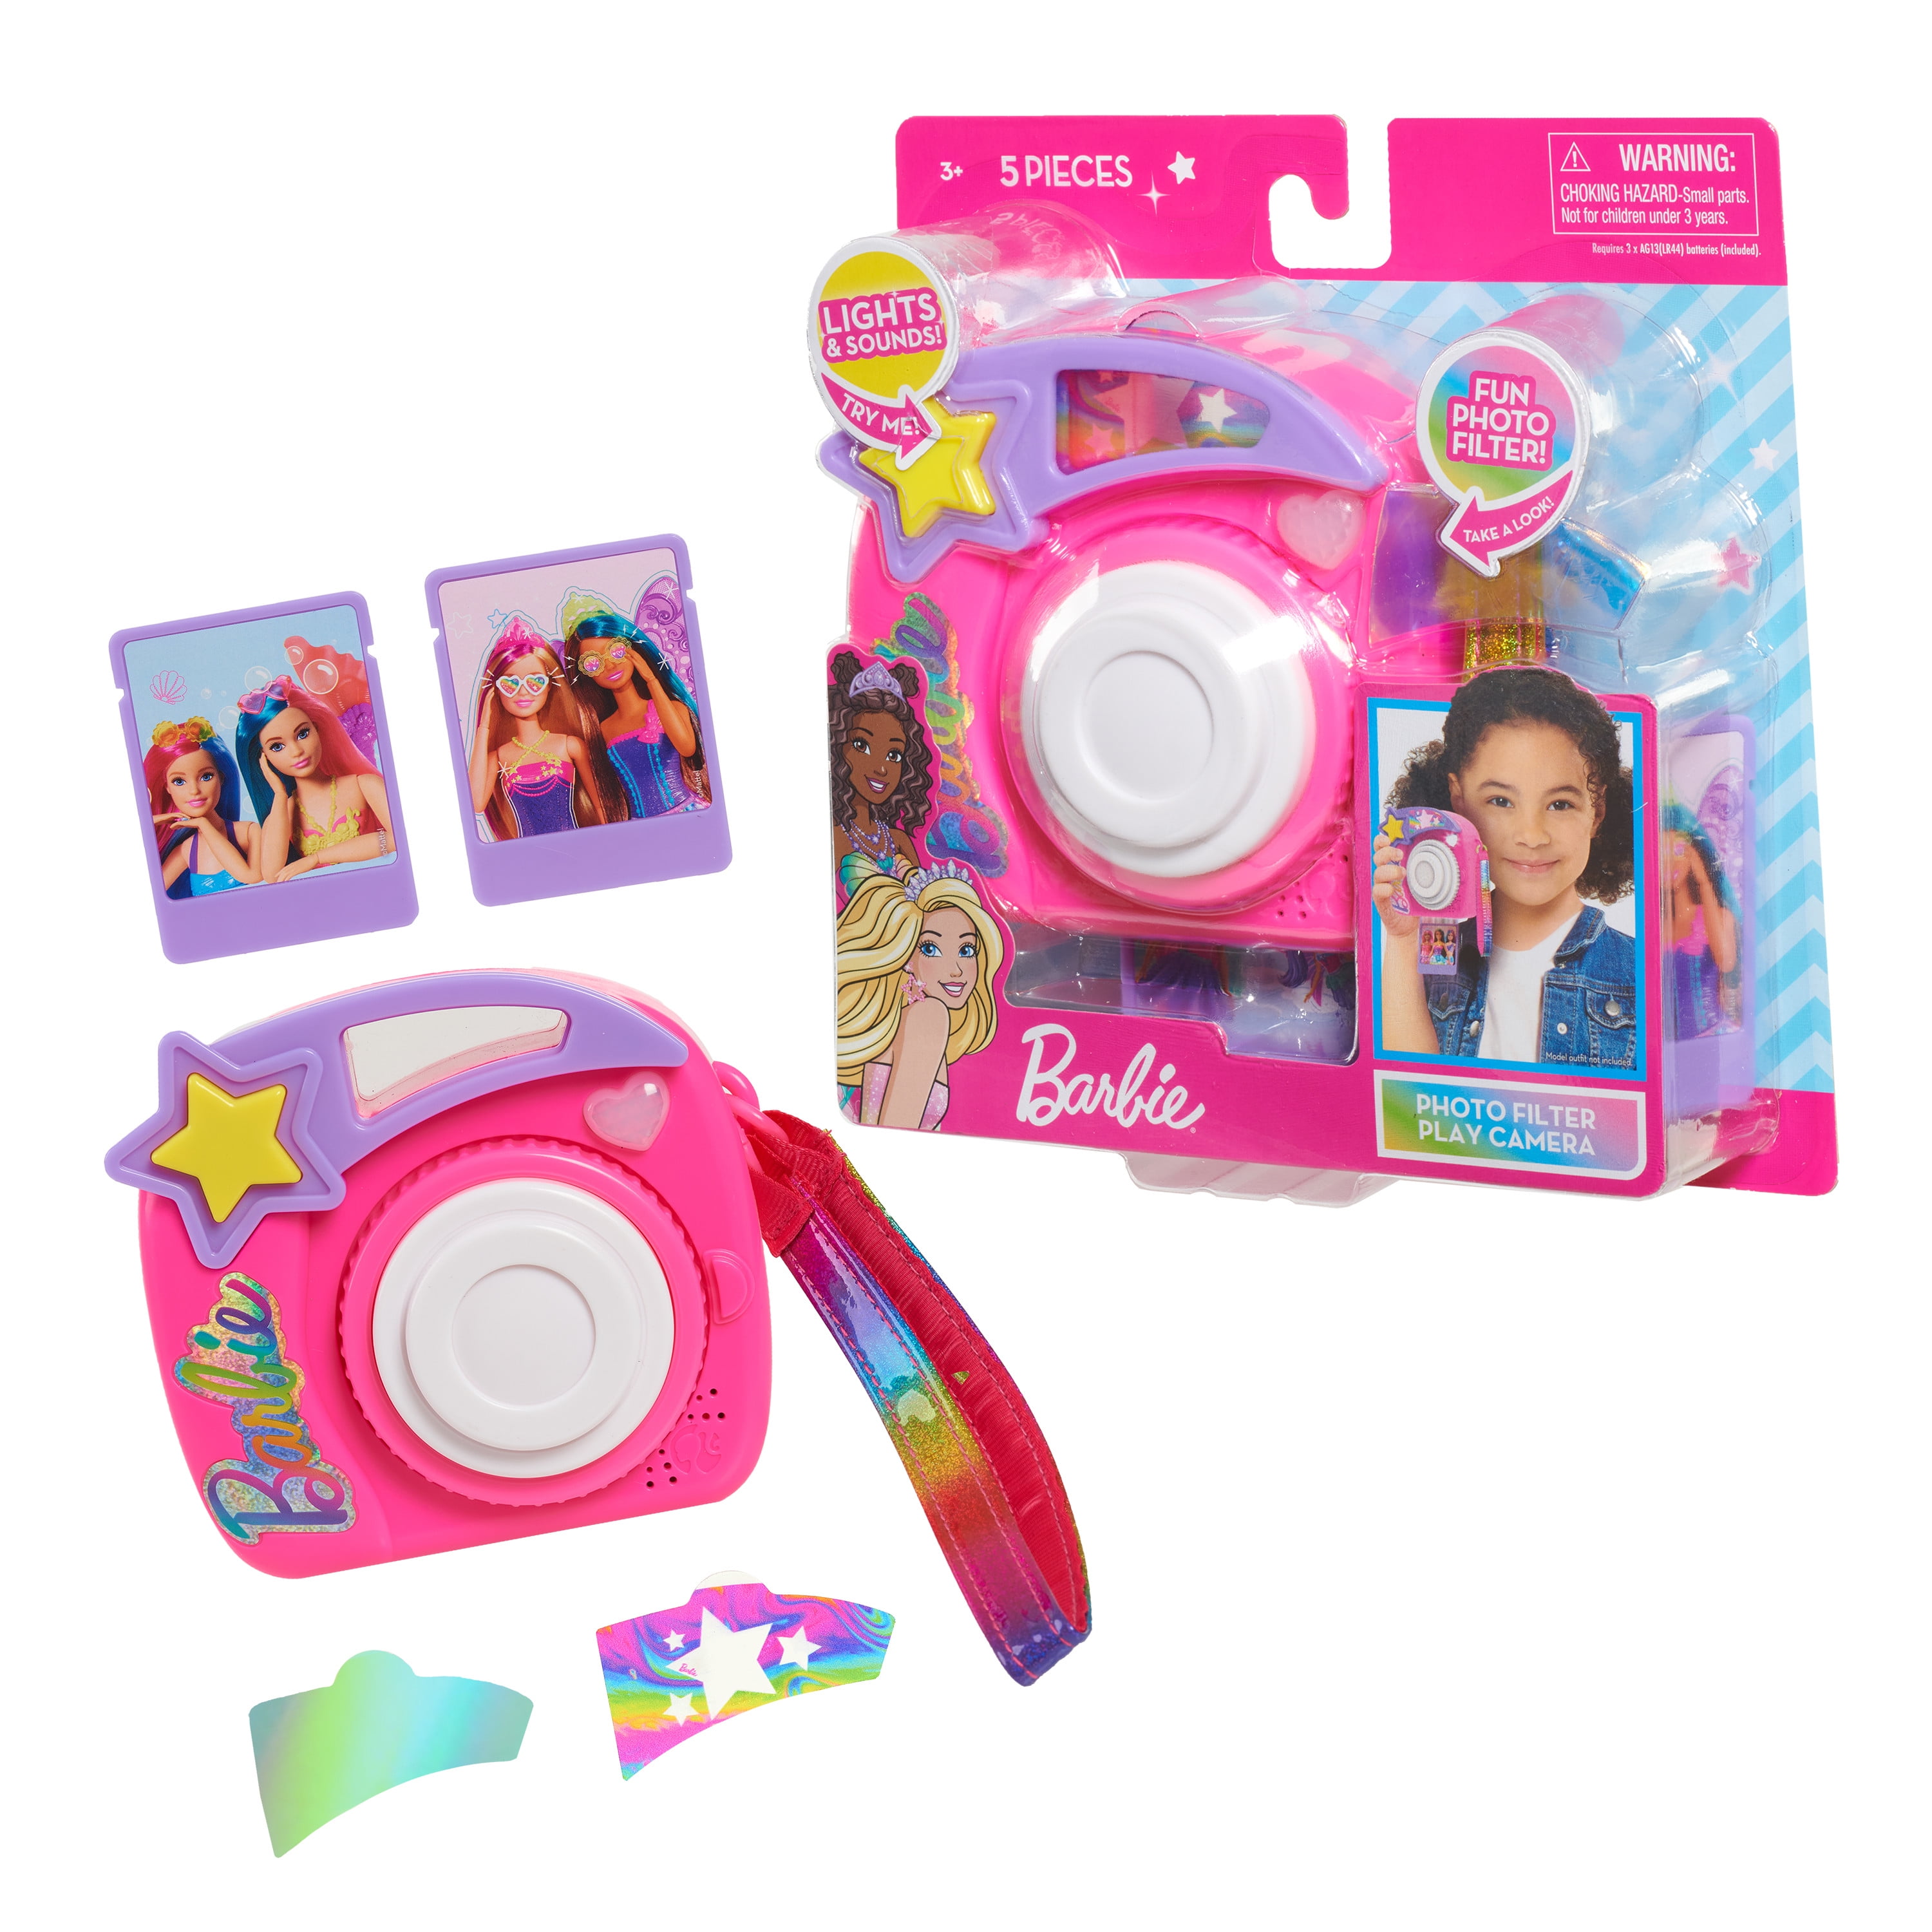 Barbie Photo Filter Play Camera, Kids Toys for Ages 3 up